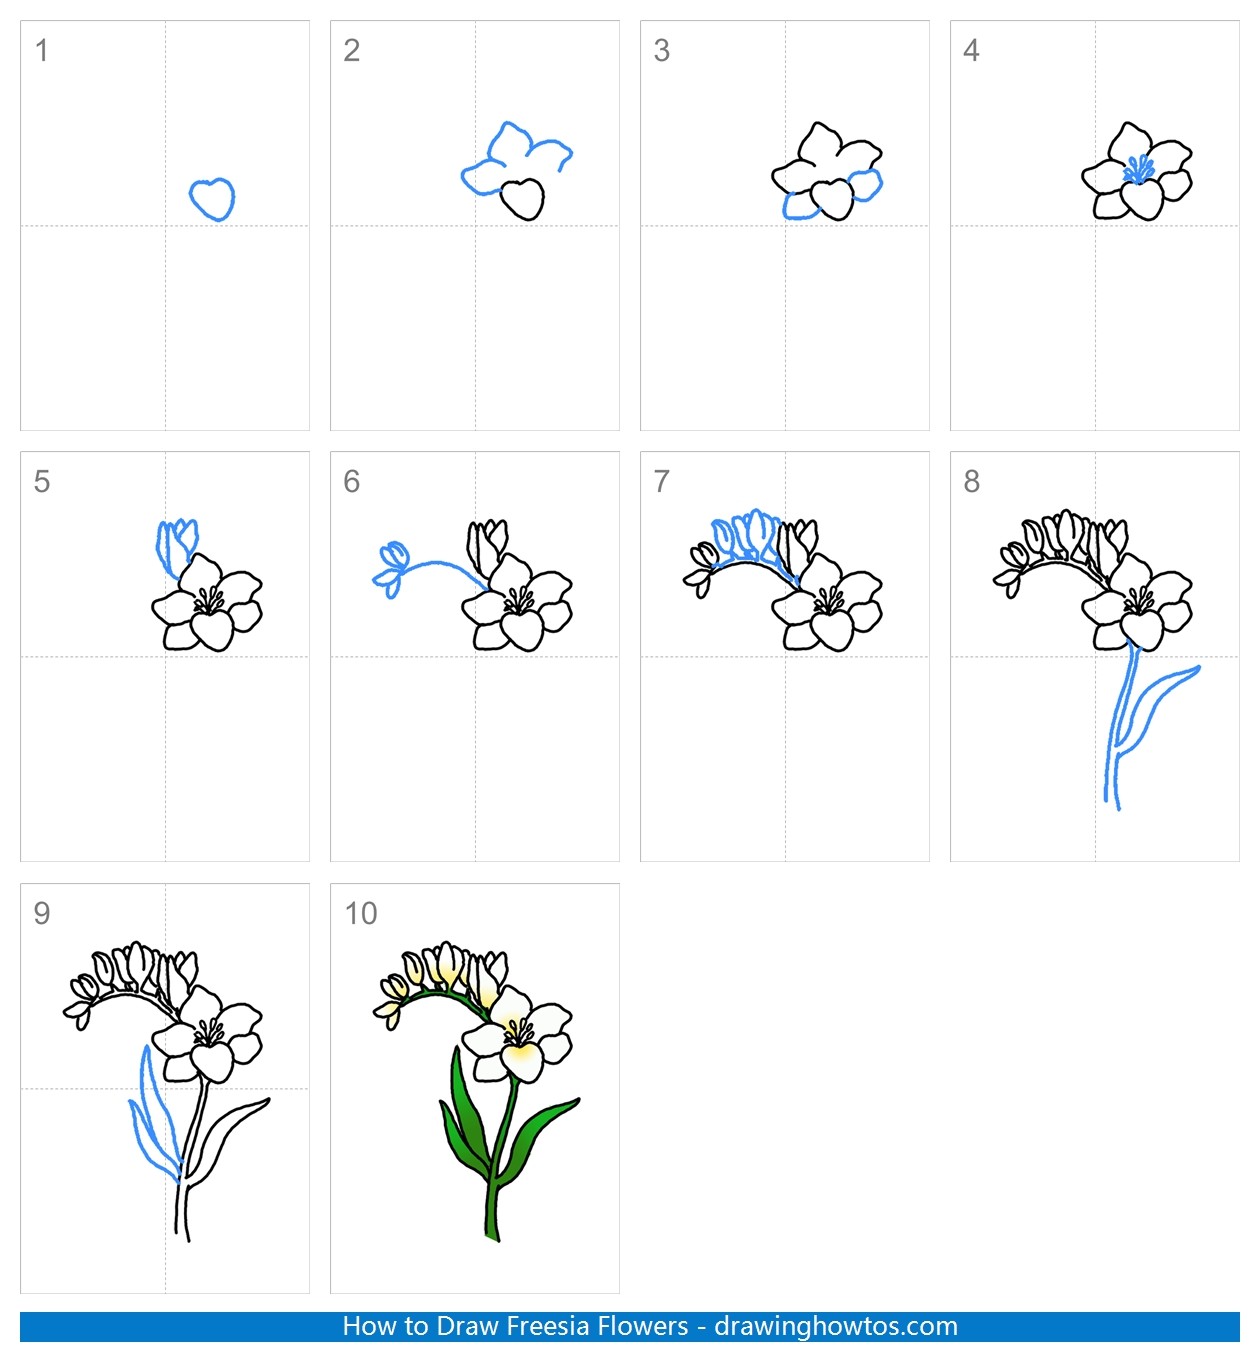 How to Draw Freesia Flowers Step by Step